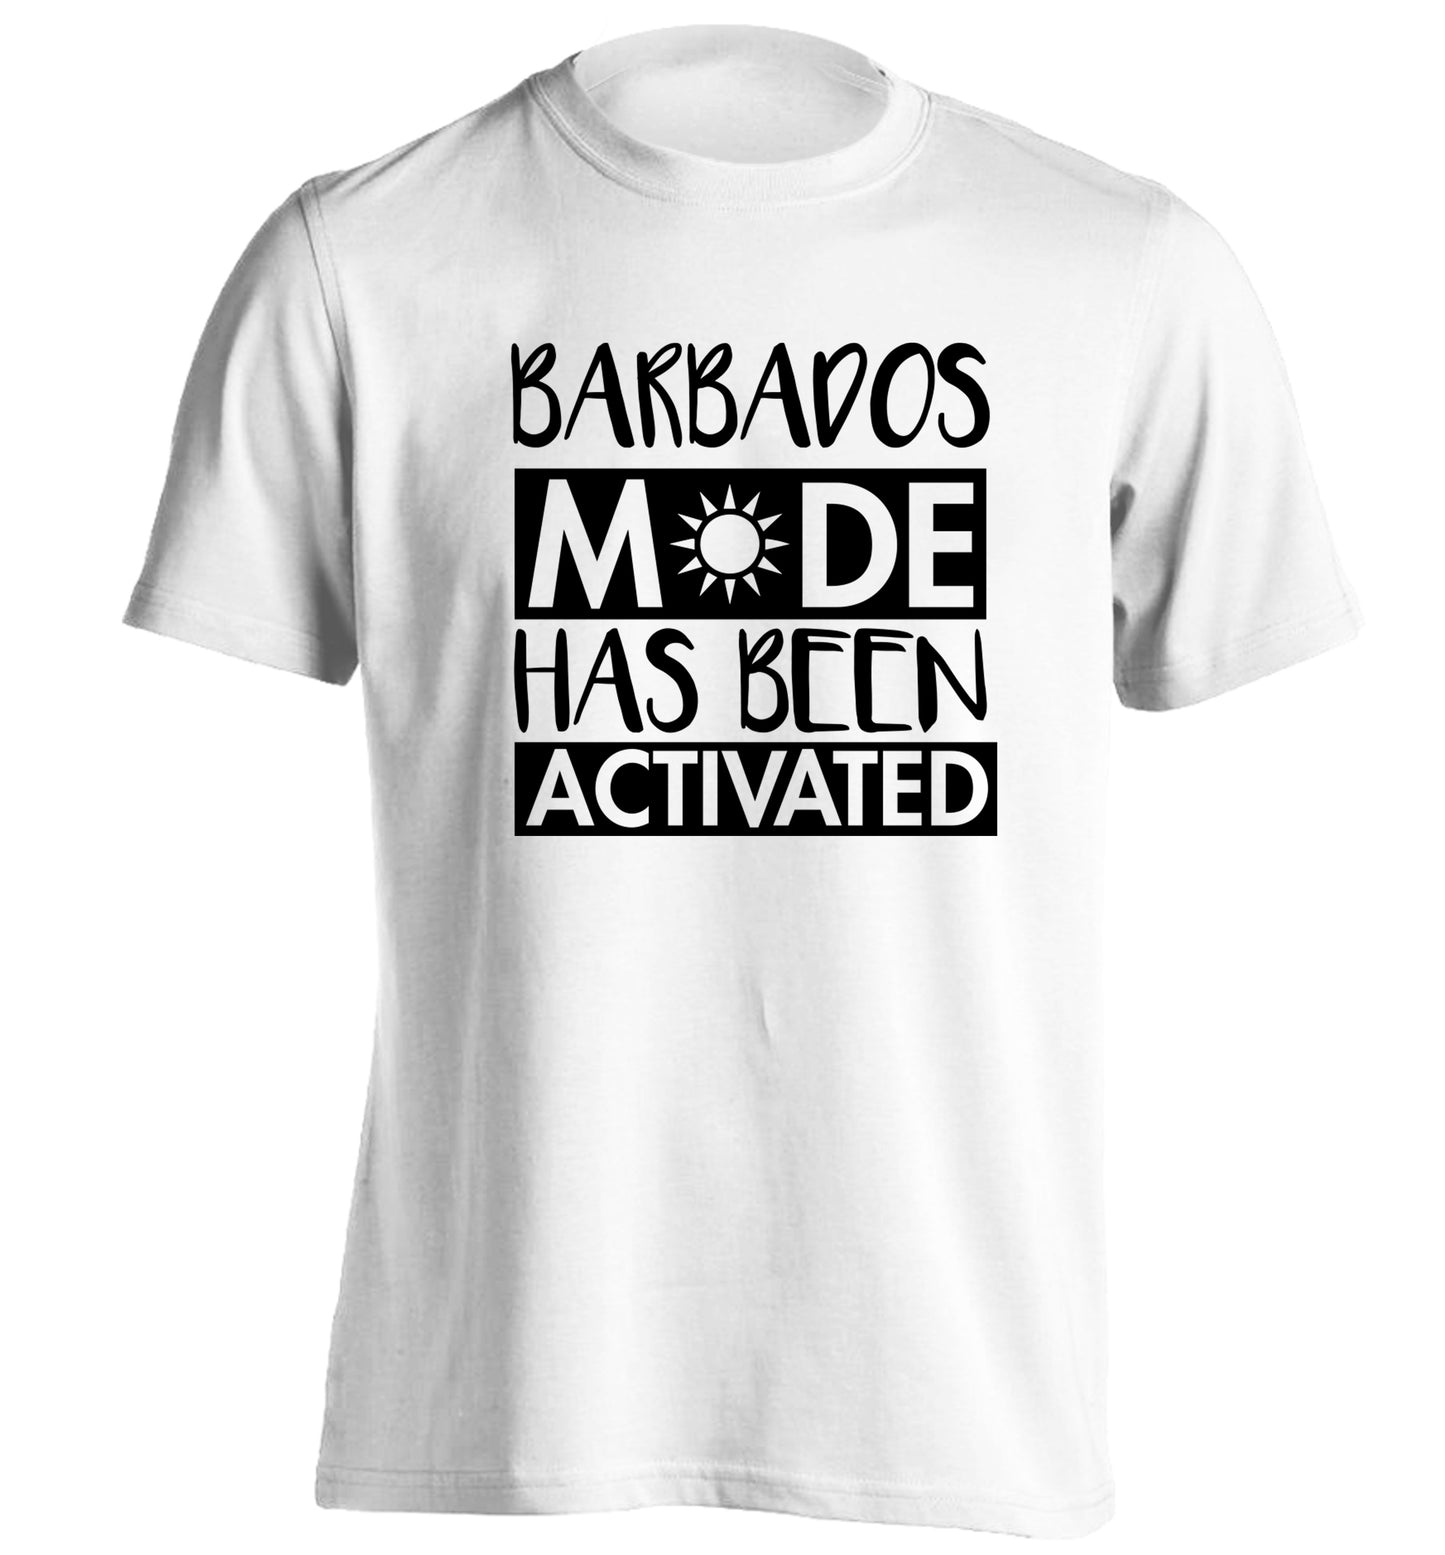 Barbados mode has been activated adults unisex white Tshirt 2XL